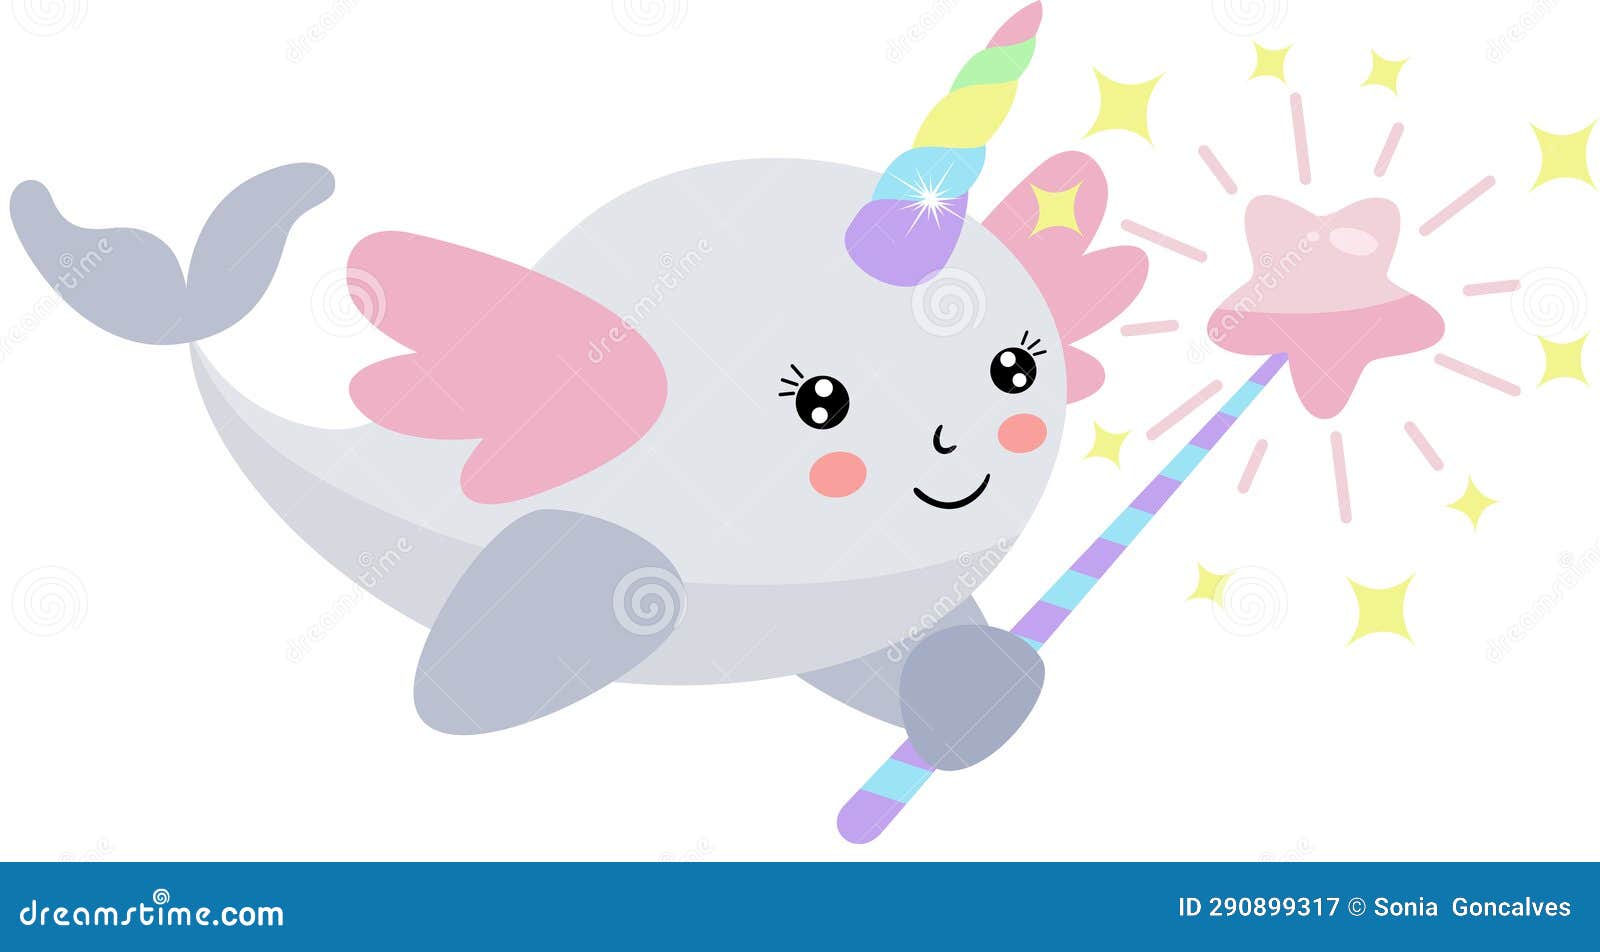 Scalable vectorial representing a unicorn whale with wings holding a star magic wand, element for design, illustration isolated on white background.